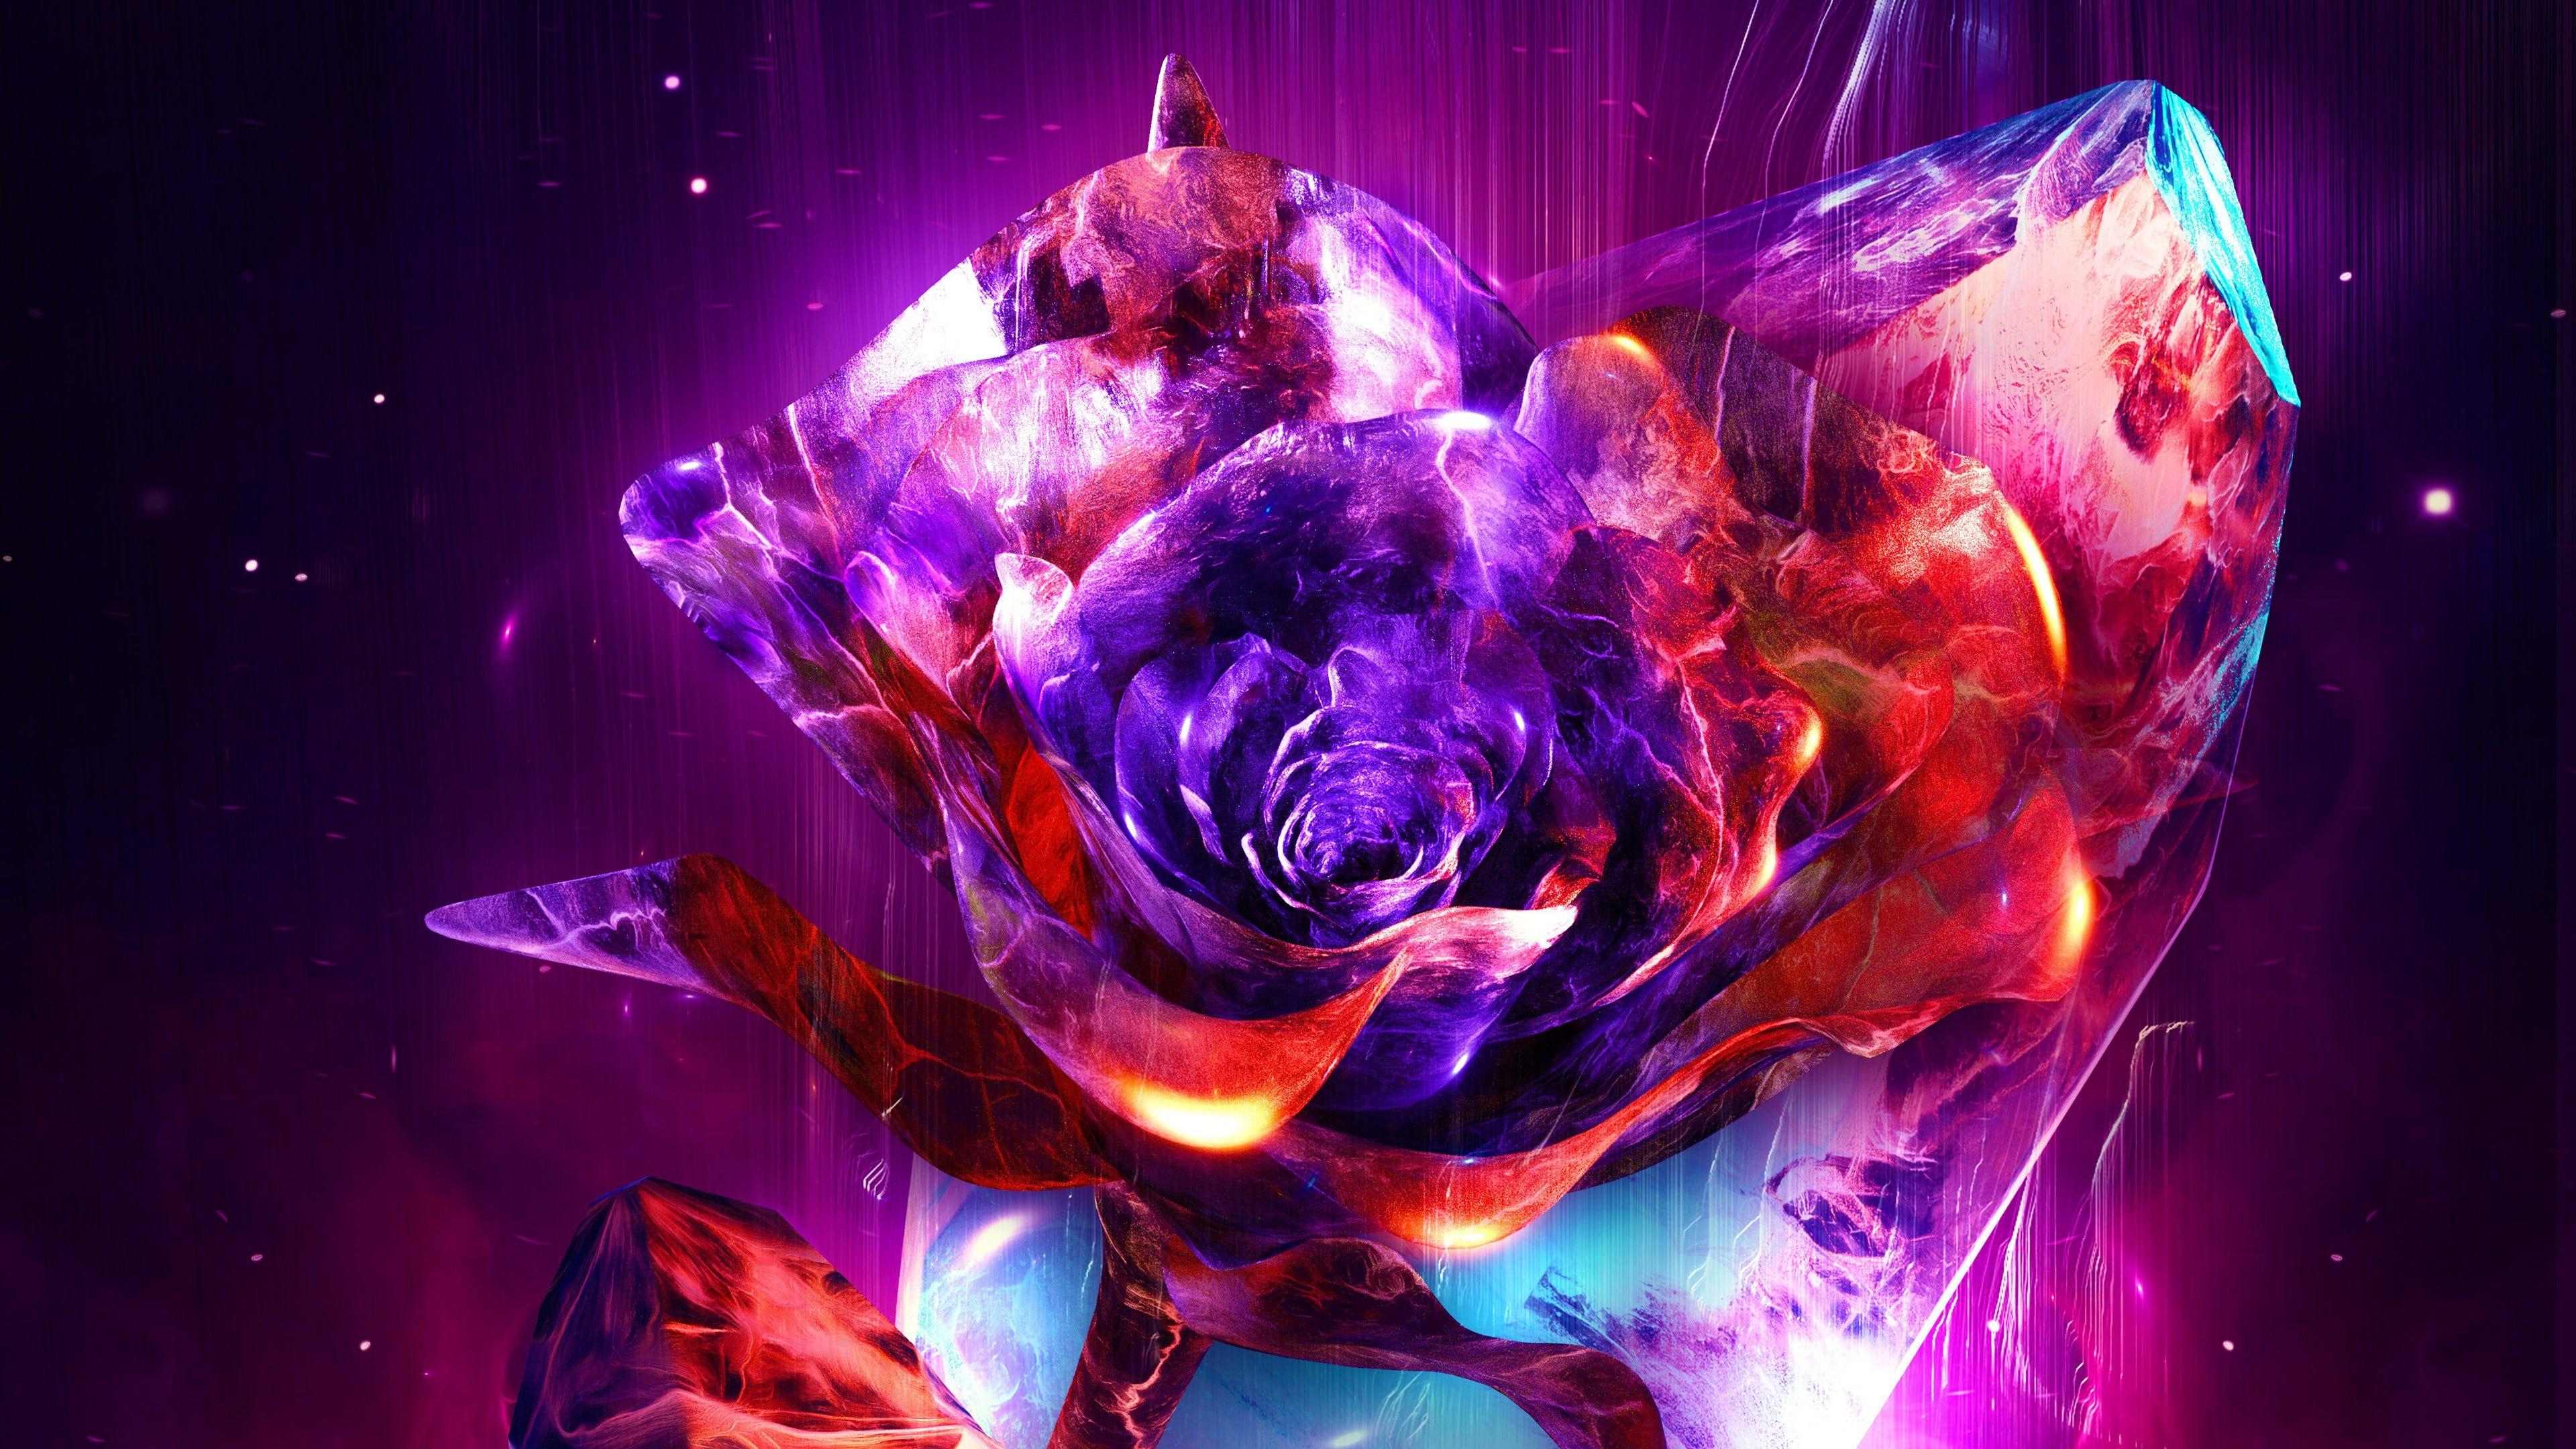 Abstract Roses Backgrounds